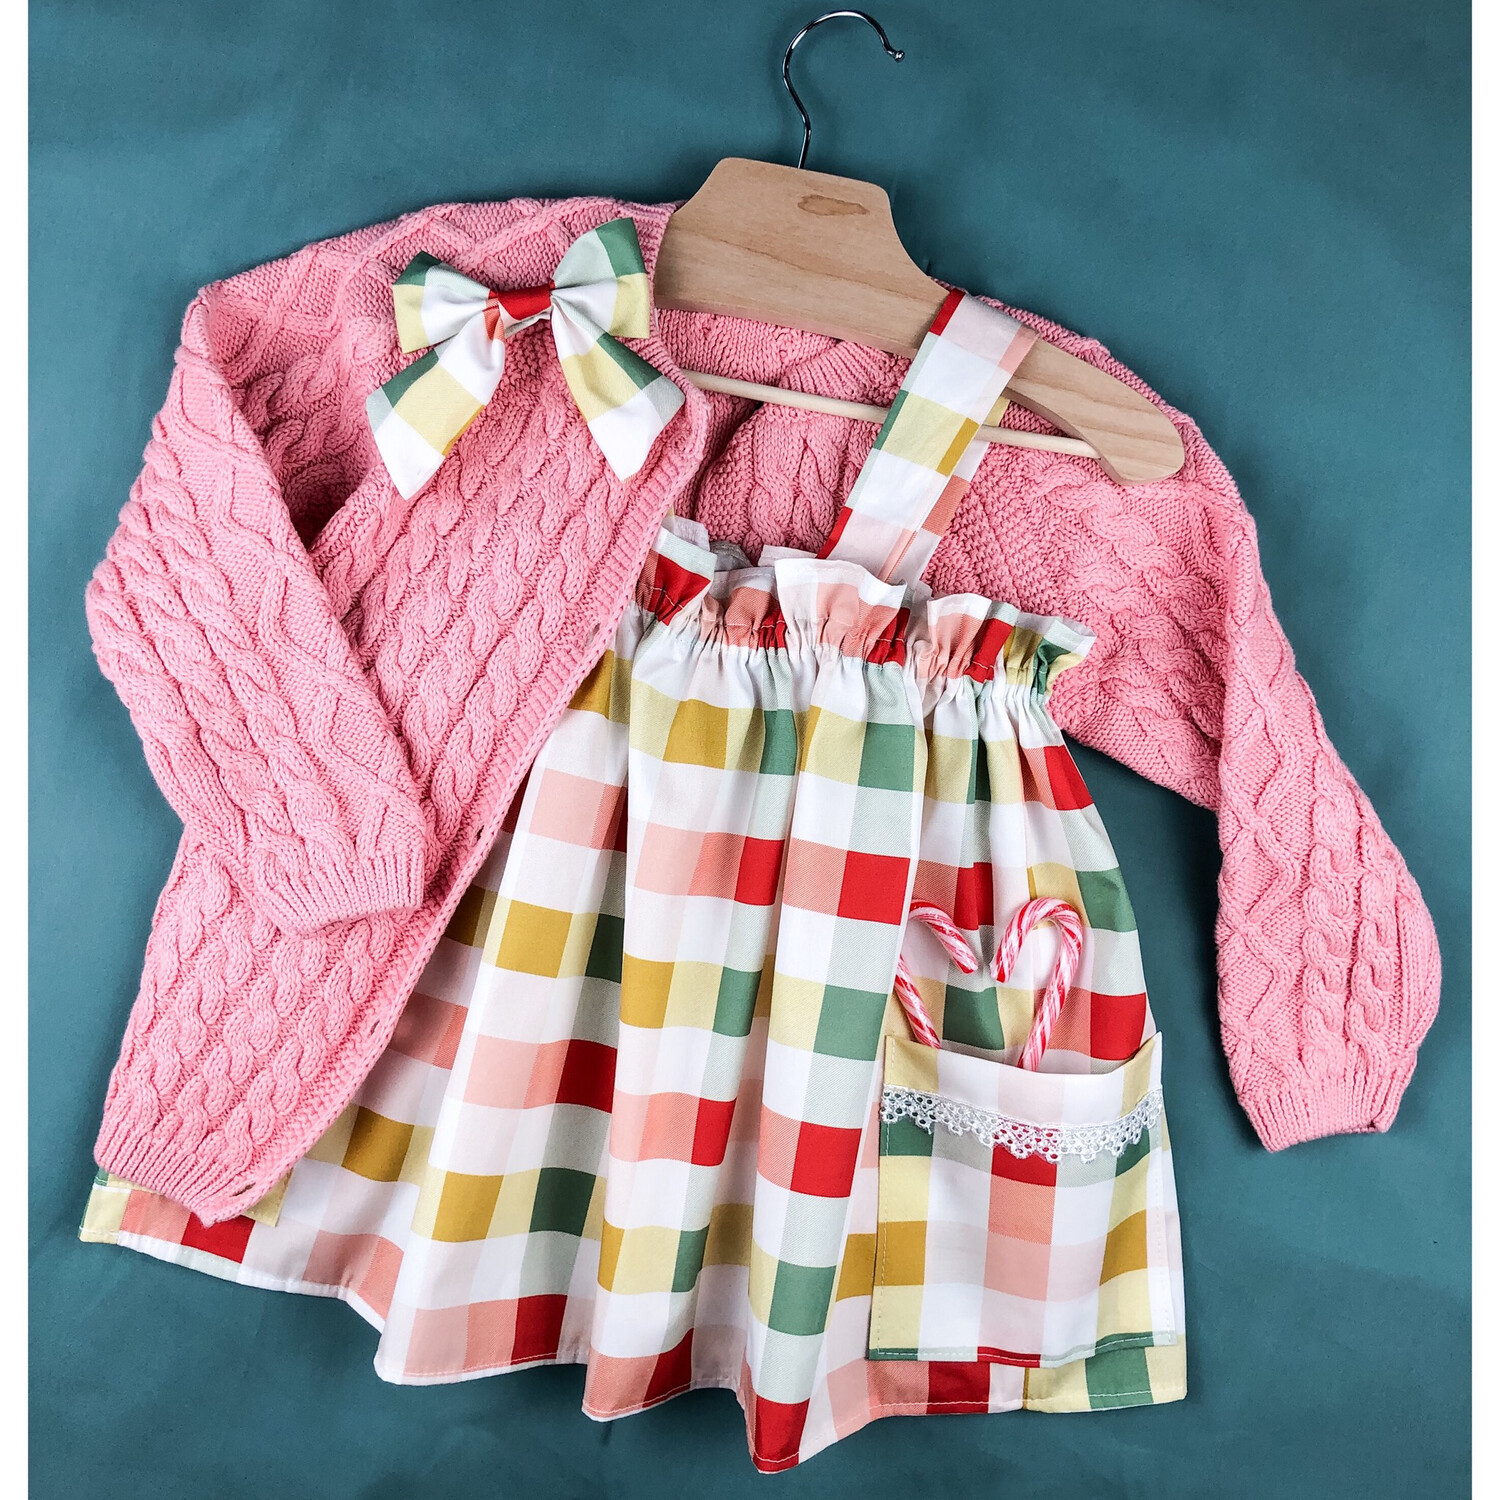 Toddler Apron Top - Holiday Plaid